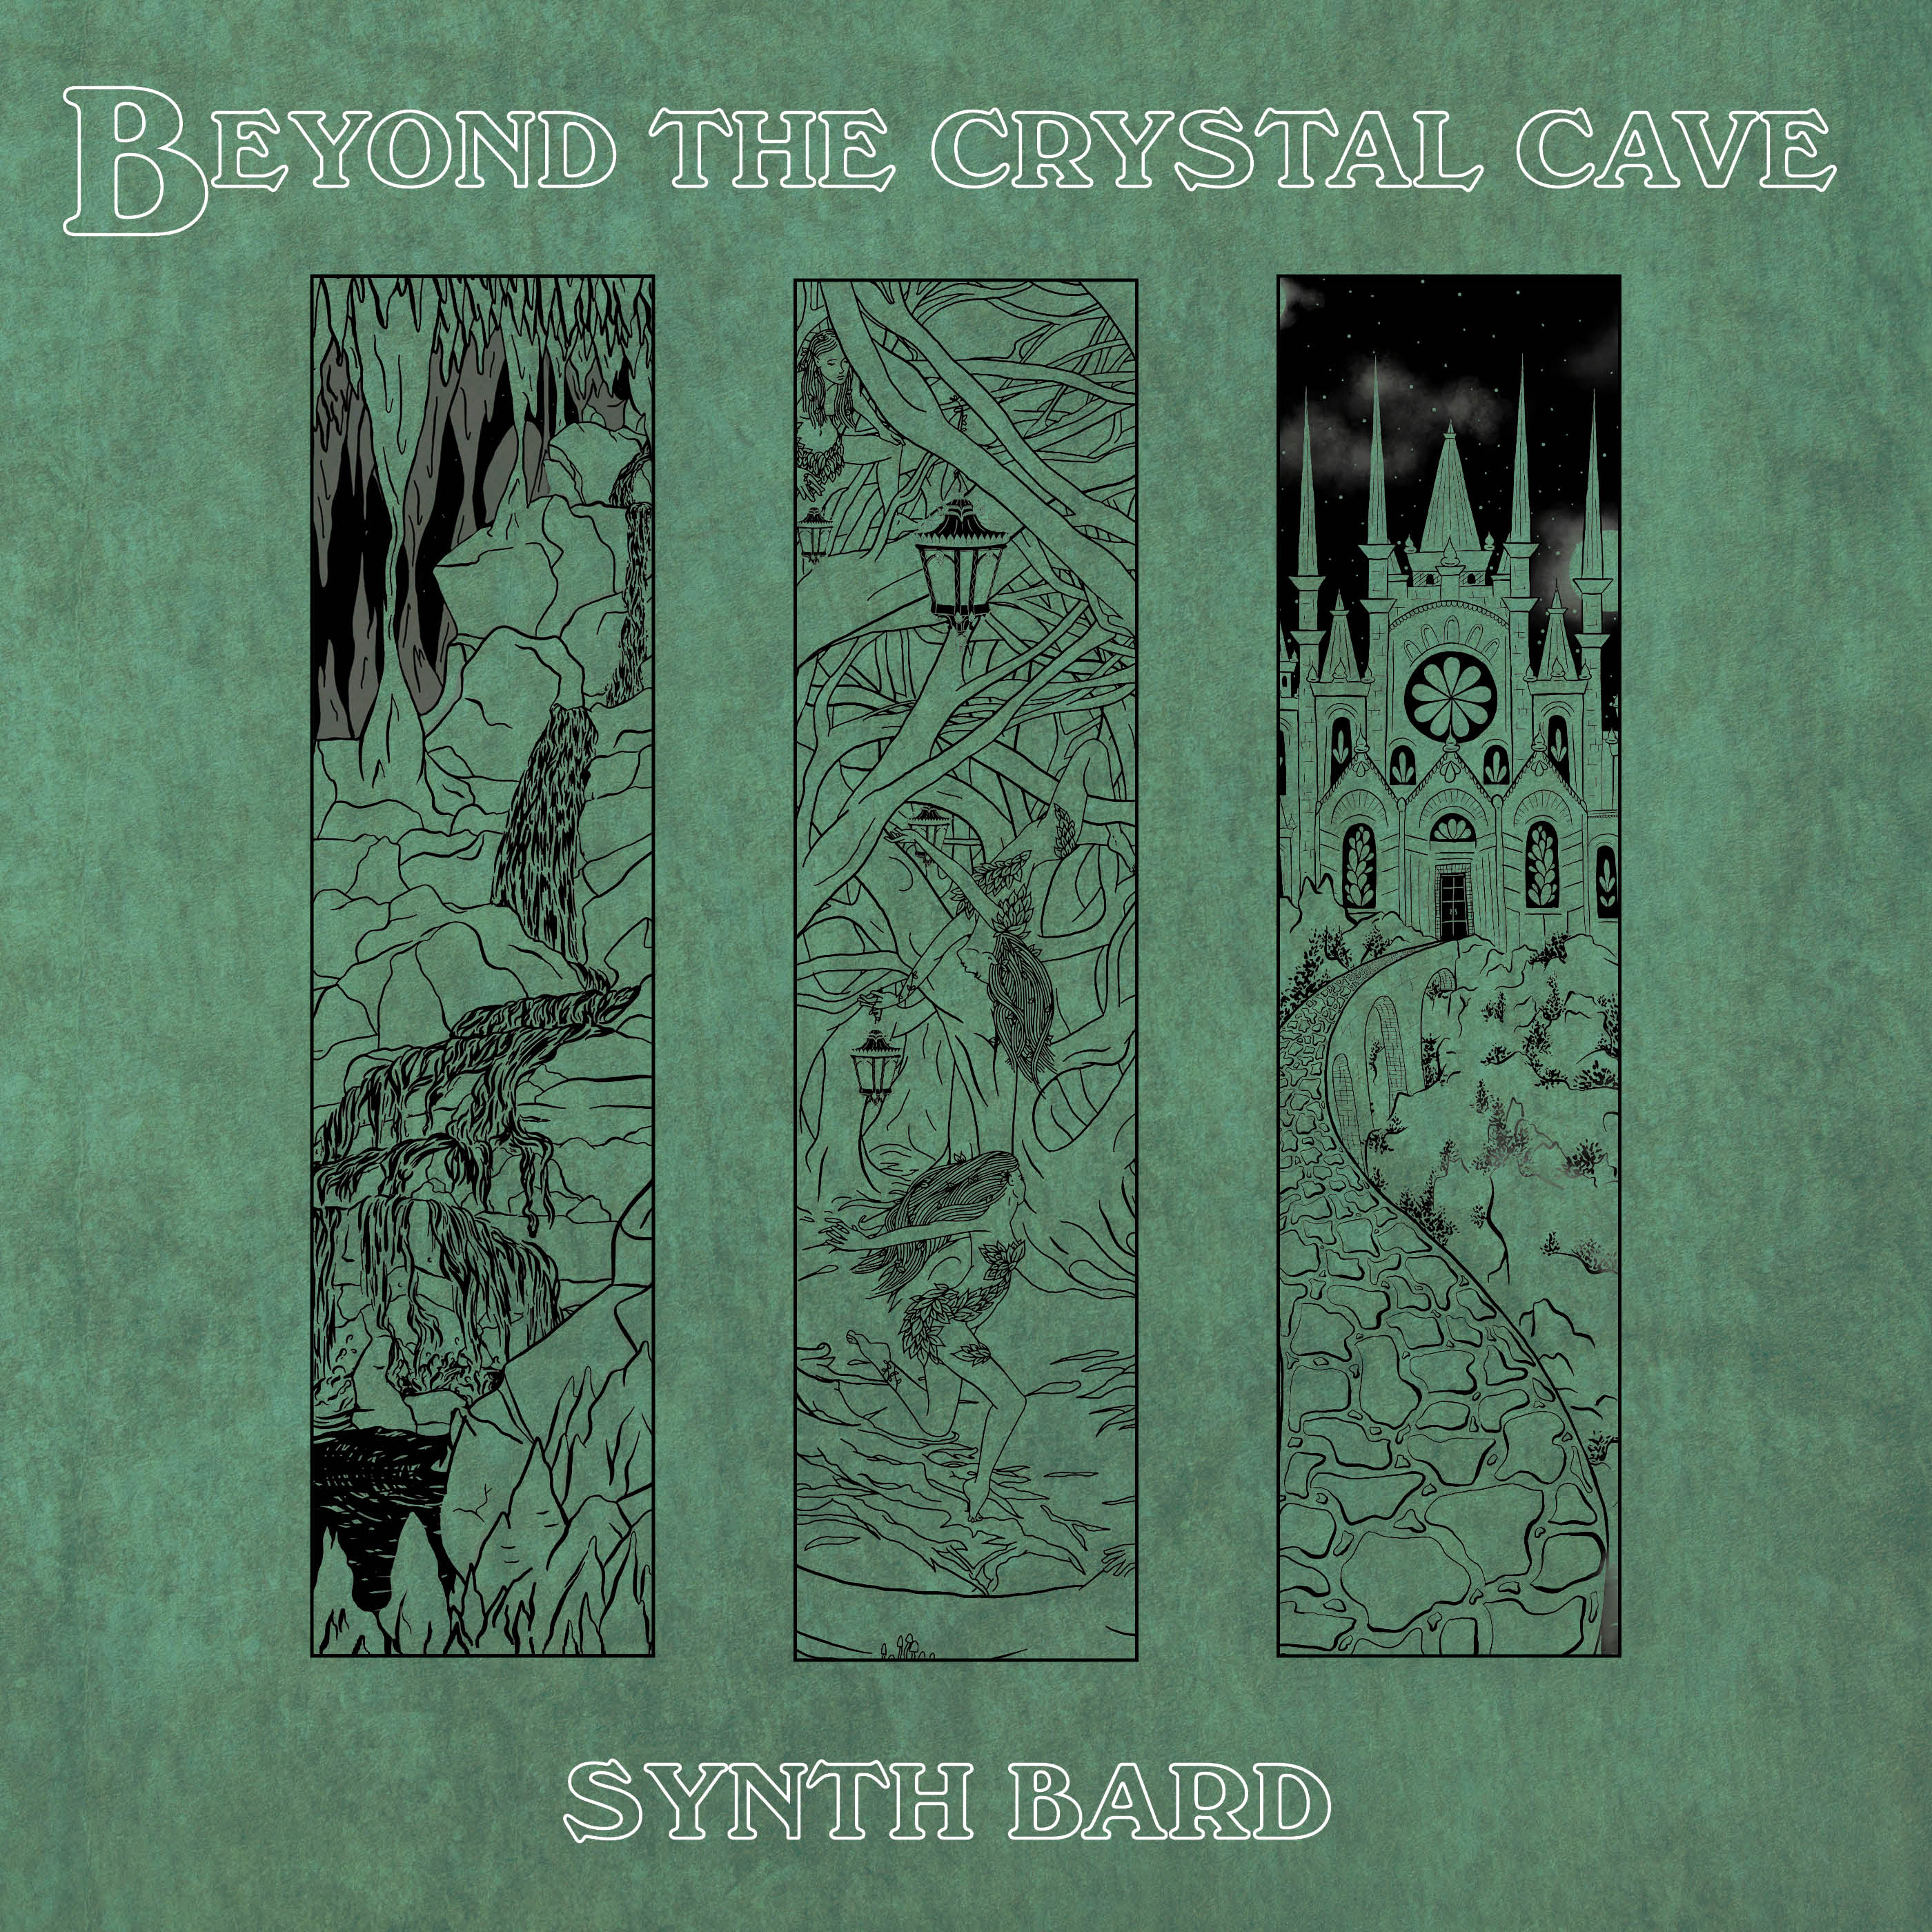 Beyond the Crystal Cave